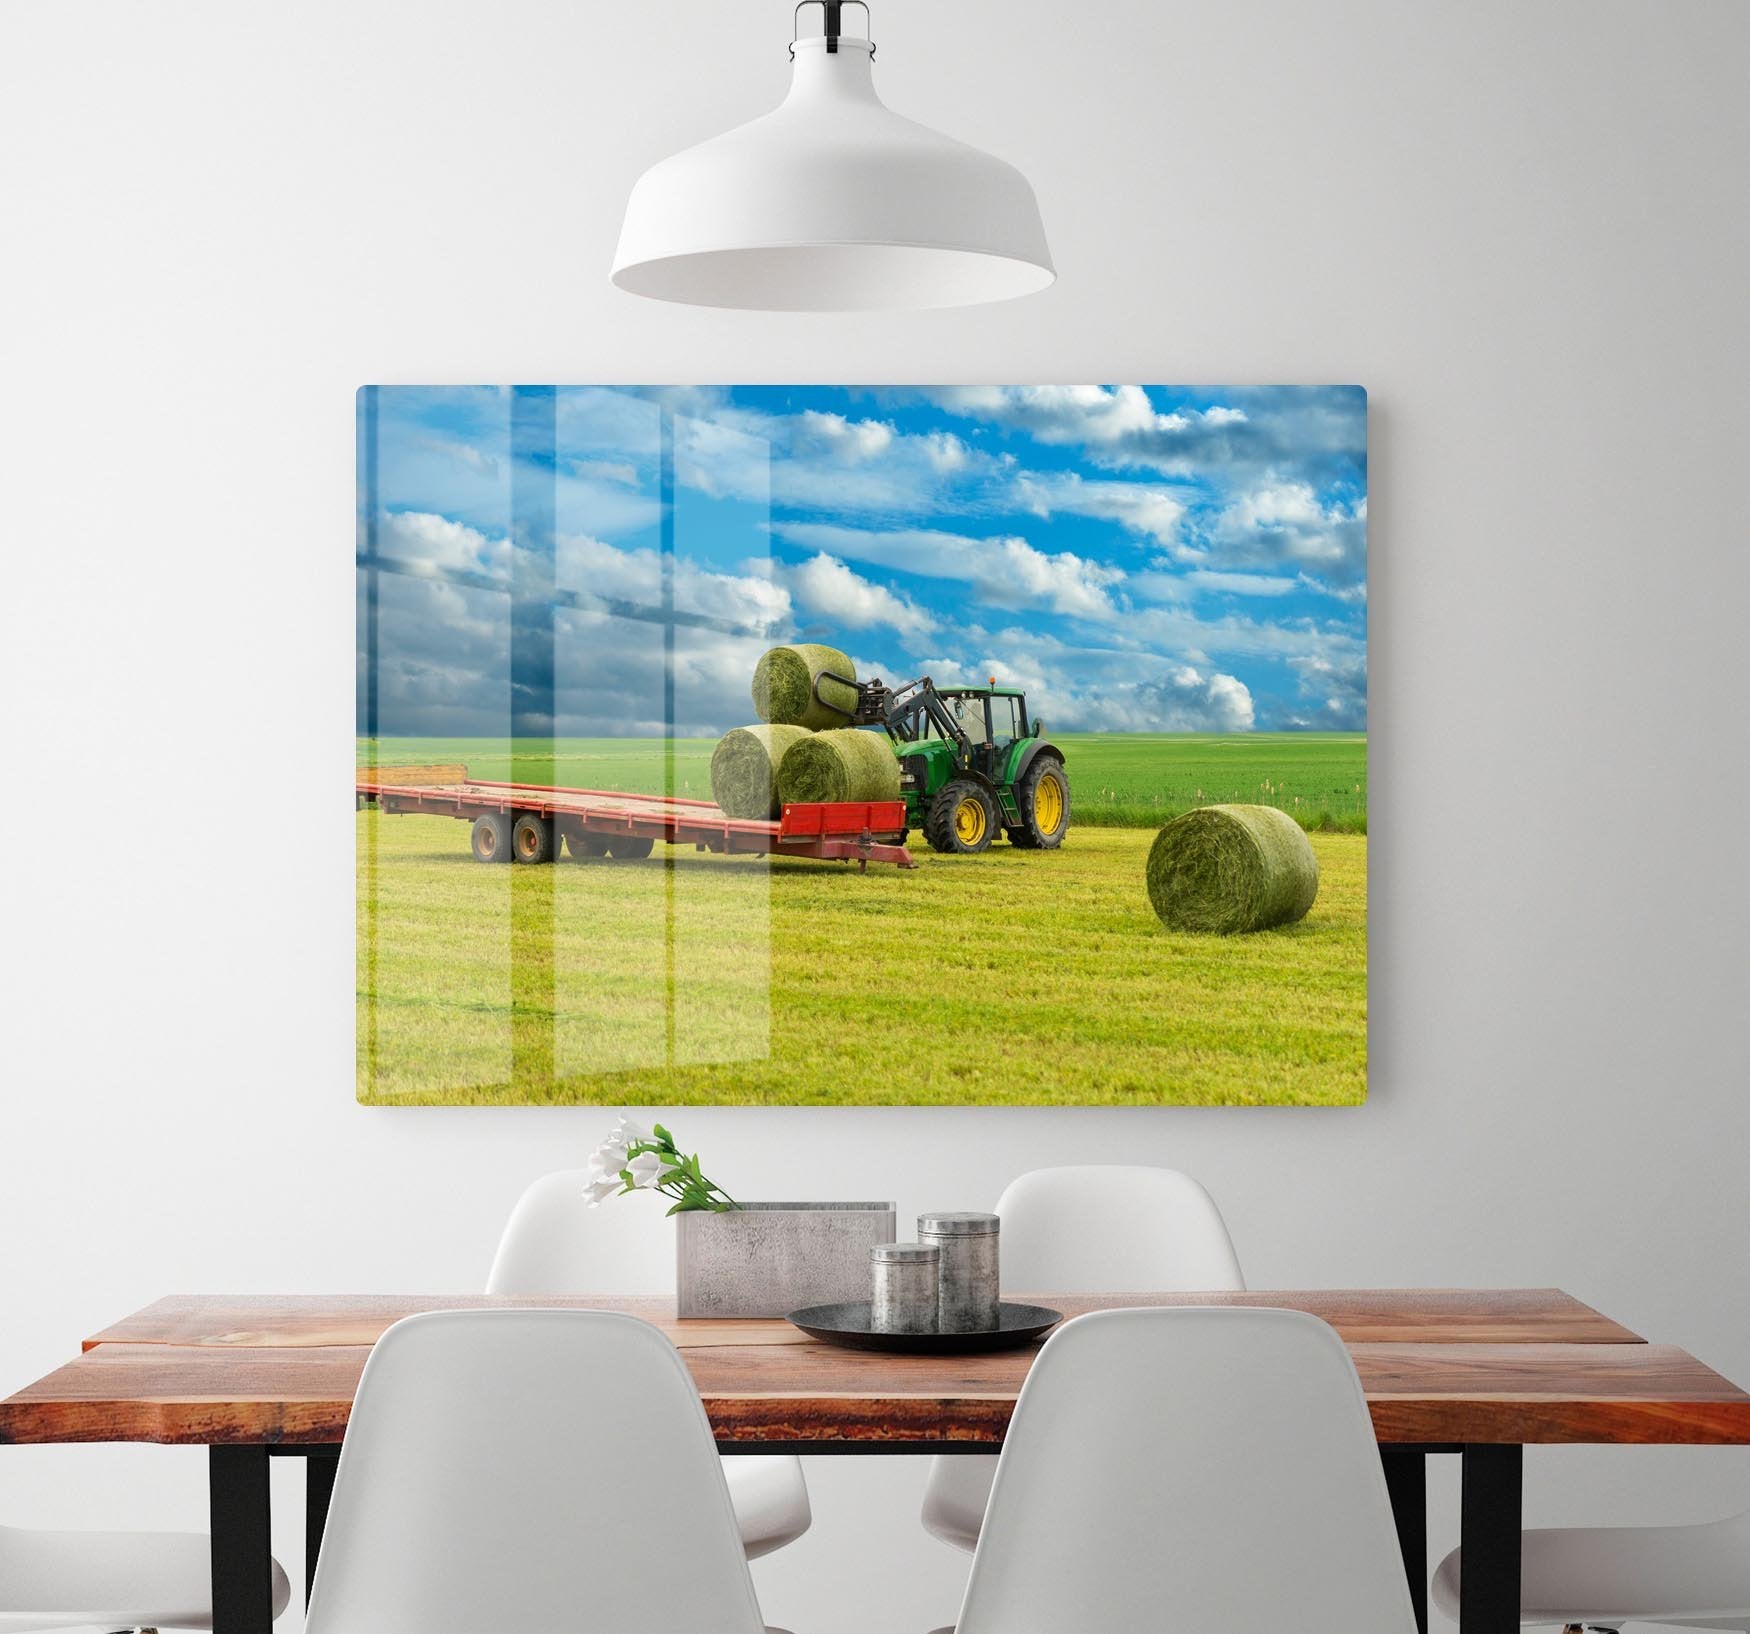 Tractor and trailer with hay bales HD Metal Print